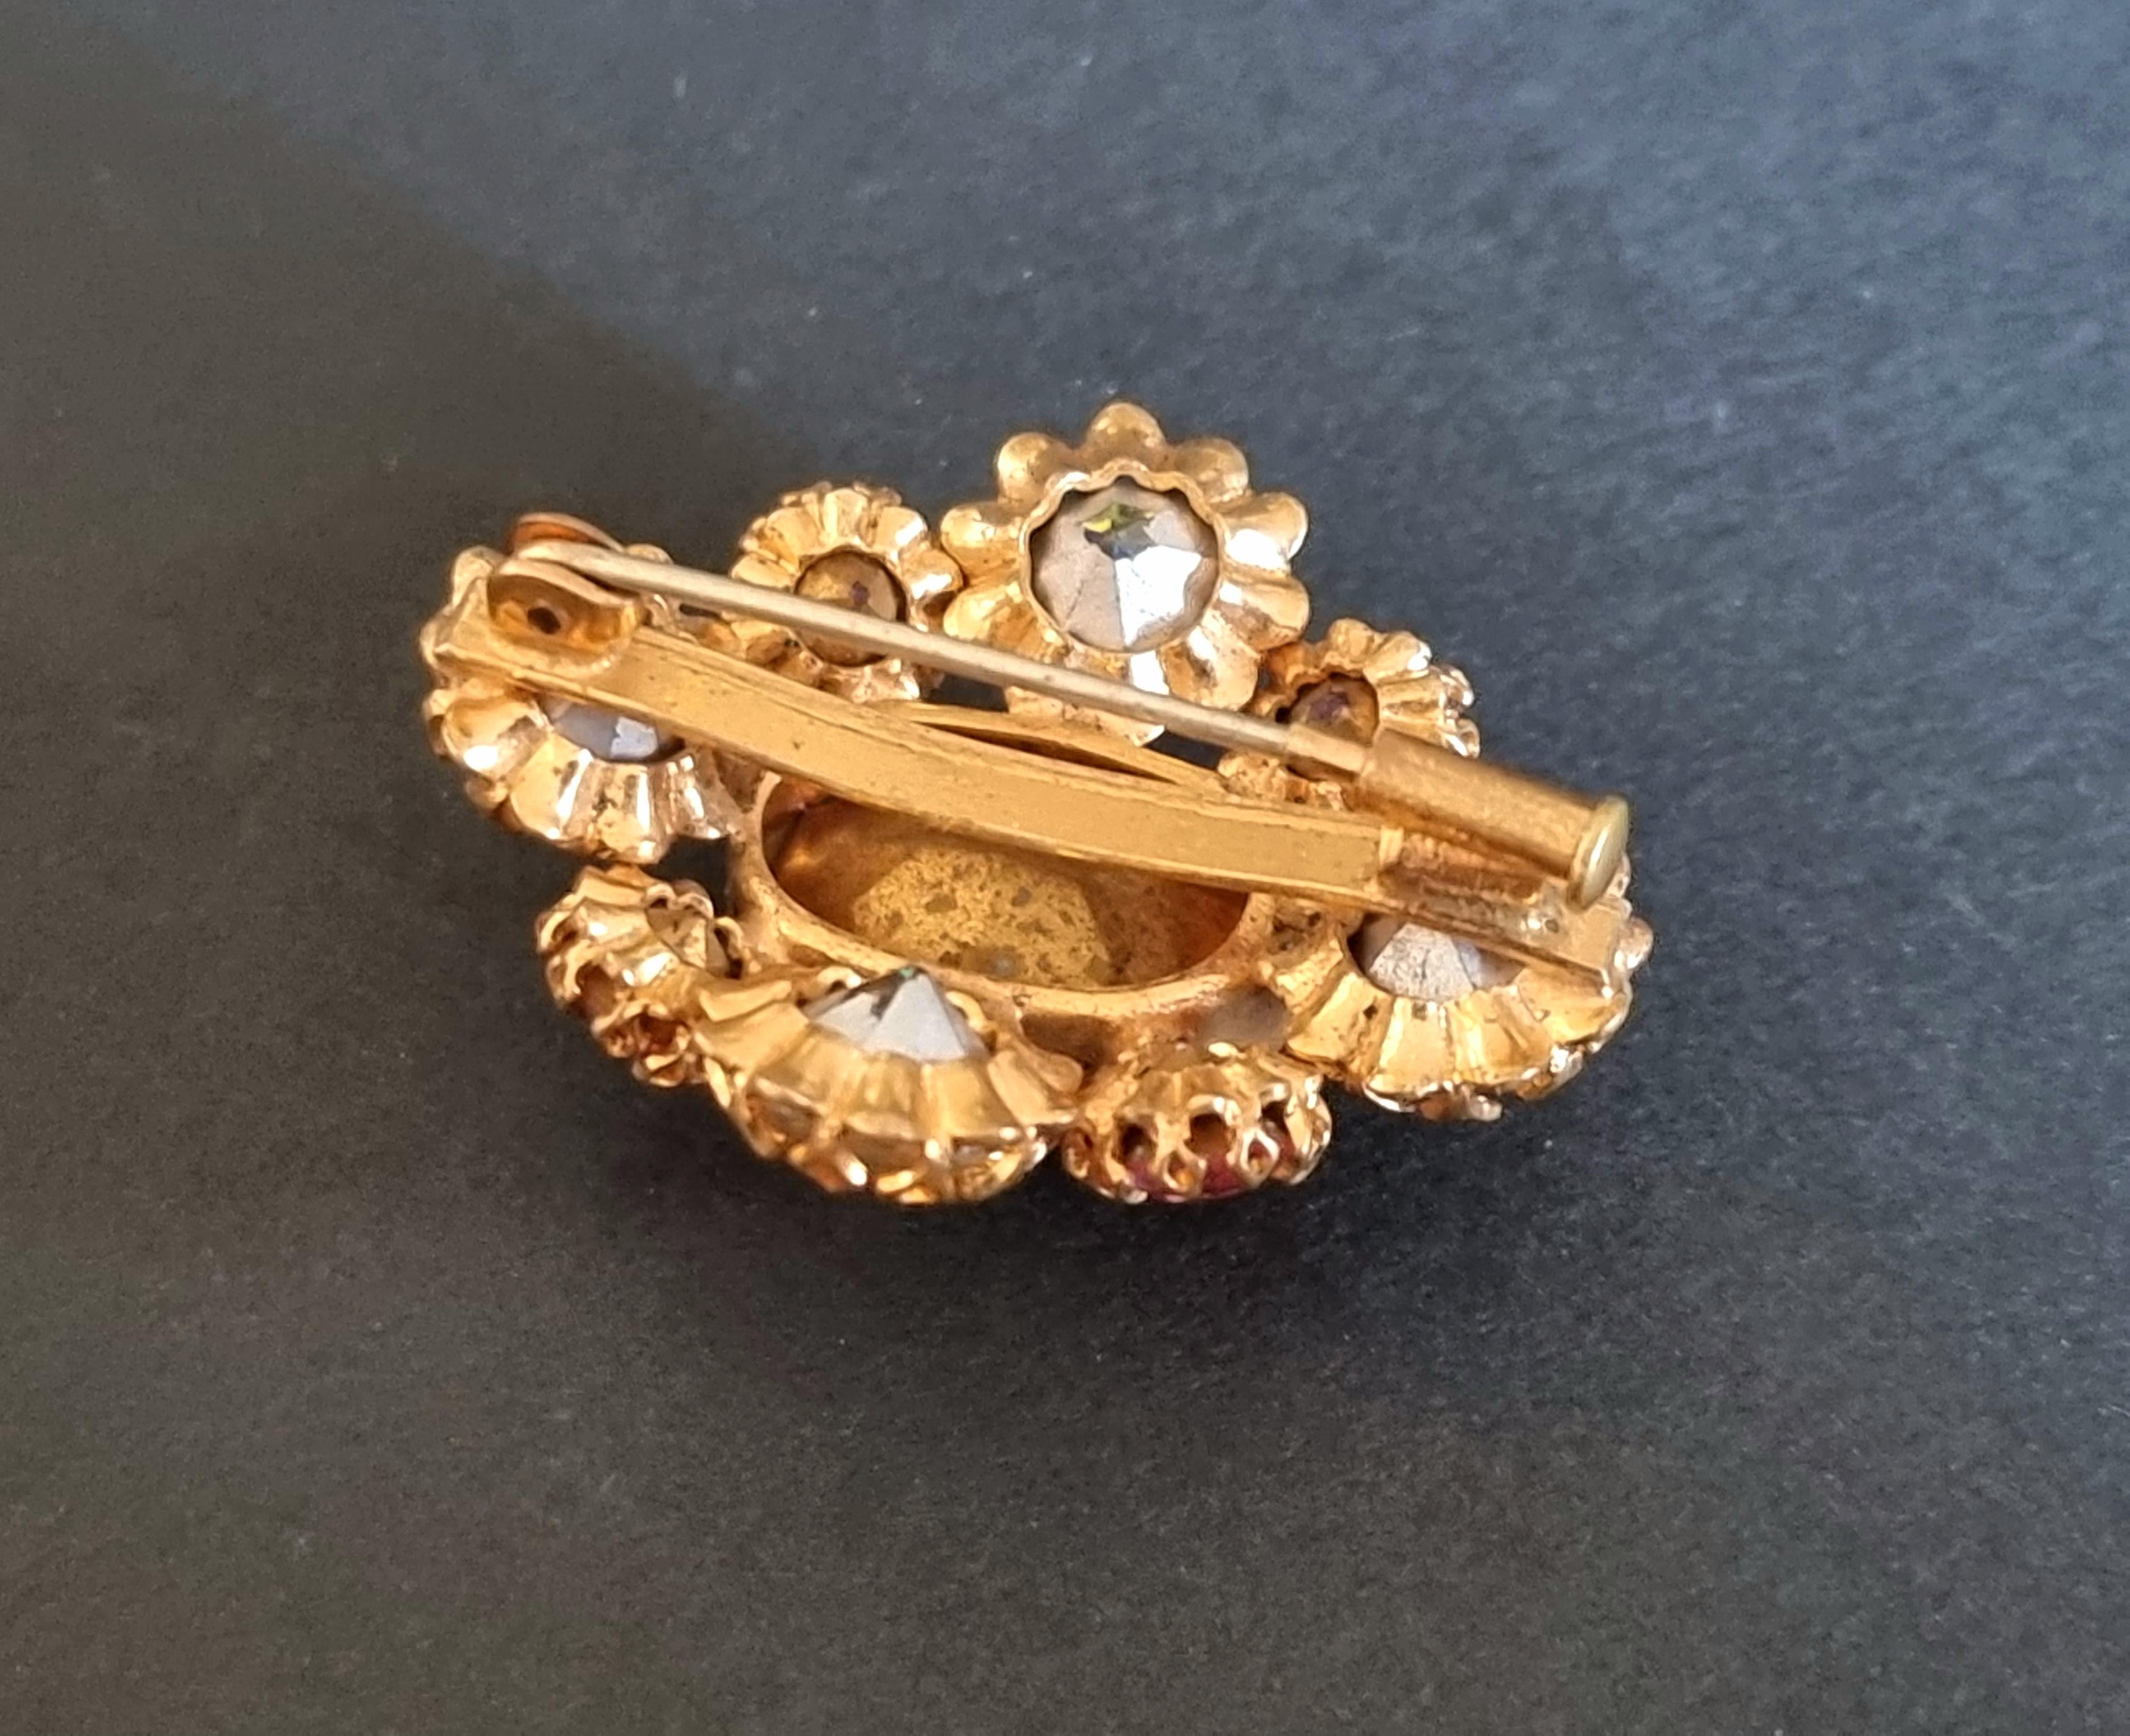 CIS countess Cissy ZOLTOWSKA, Magnificent old BROOCH, vintage 50s, High Fashion For Sale 4